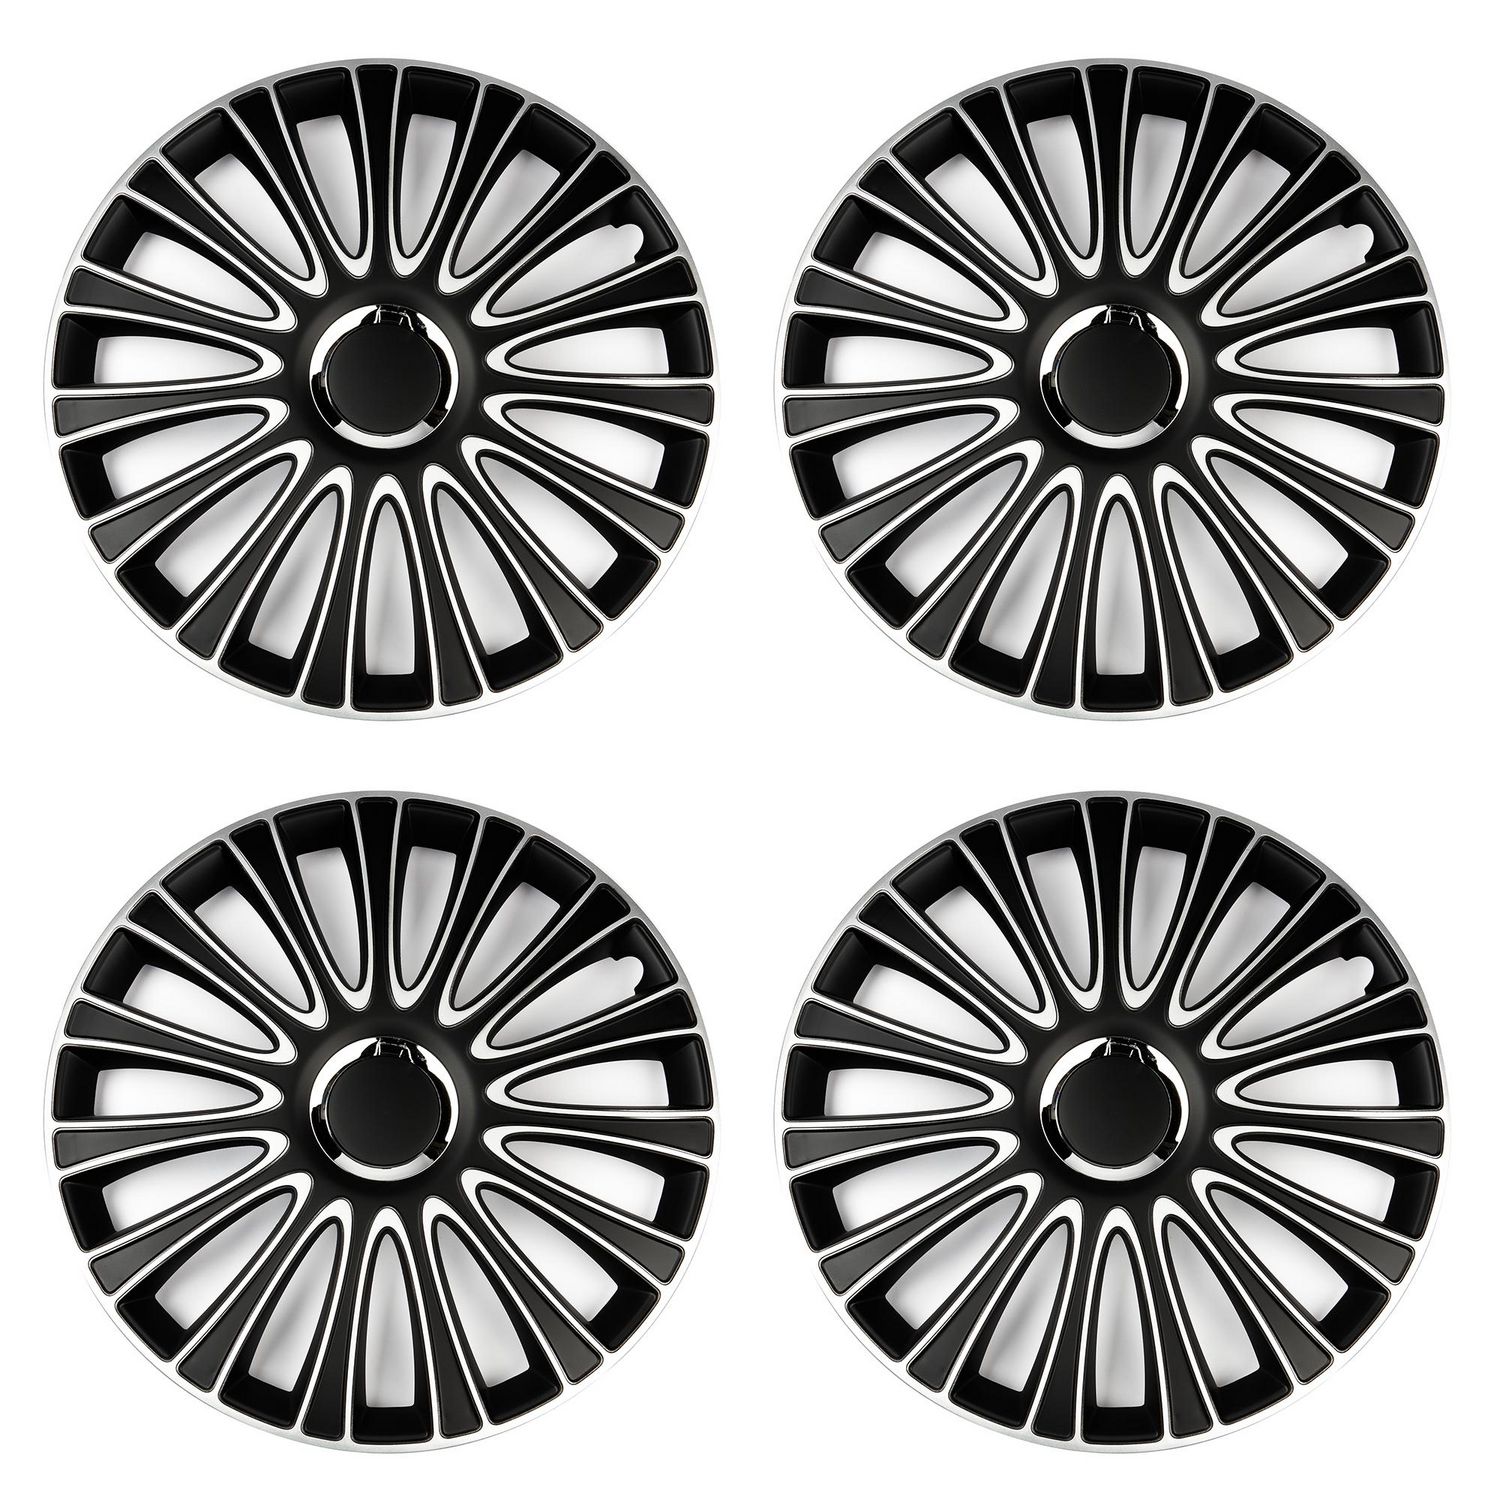 Alpena 16" Le Mans Wheel Covers, Silver, set of